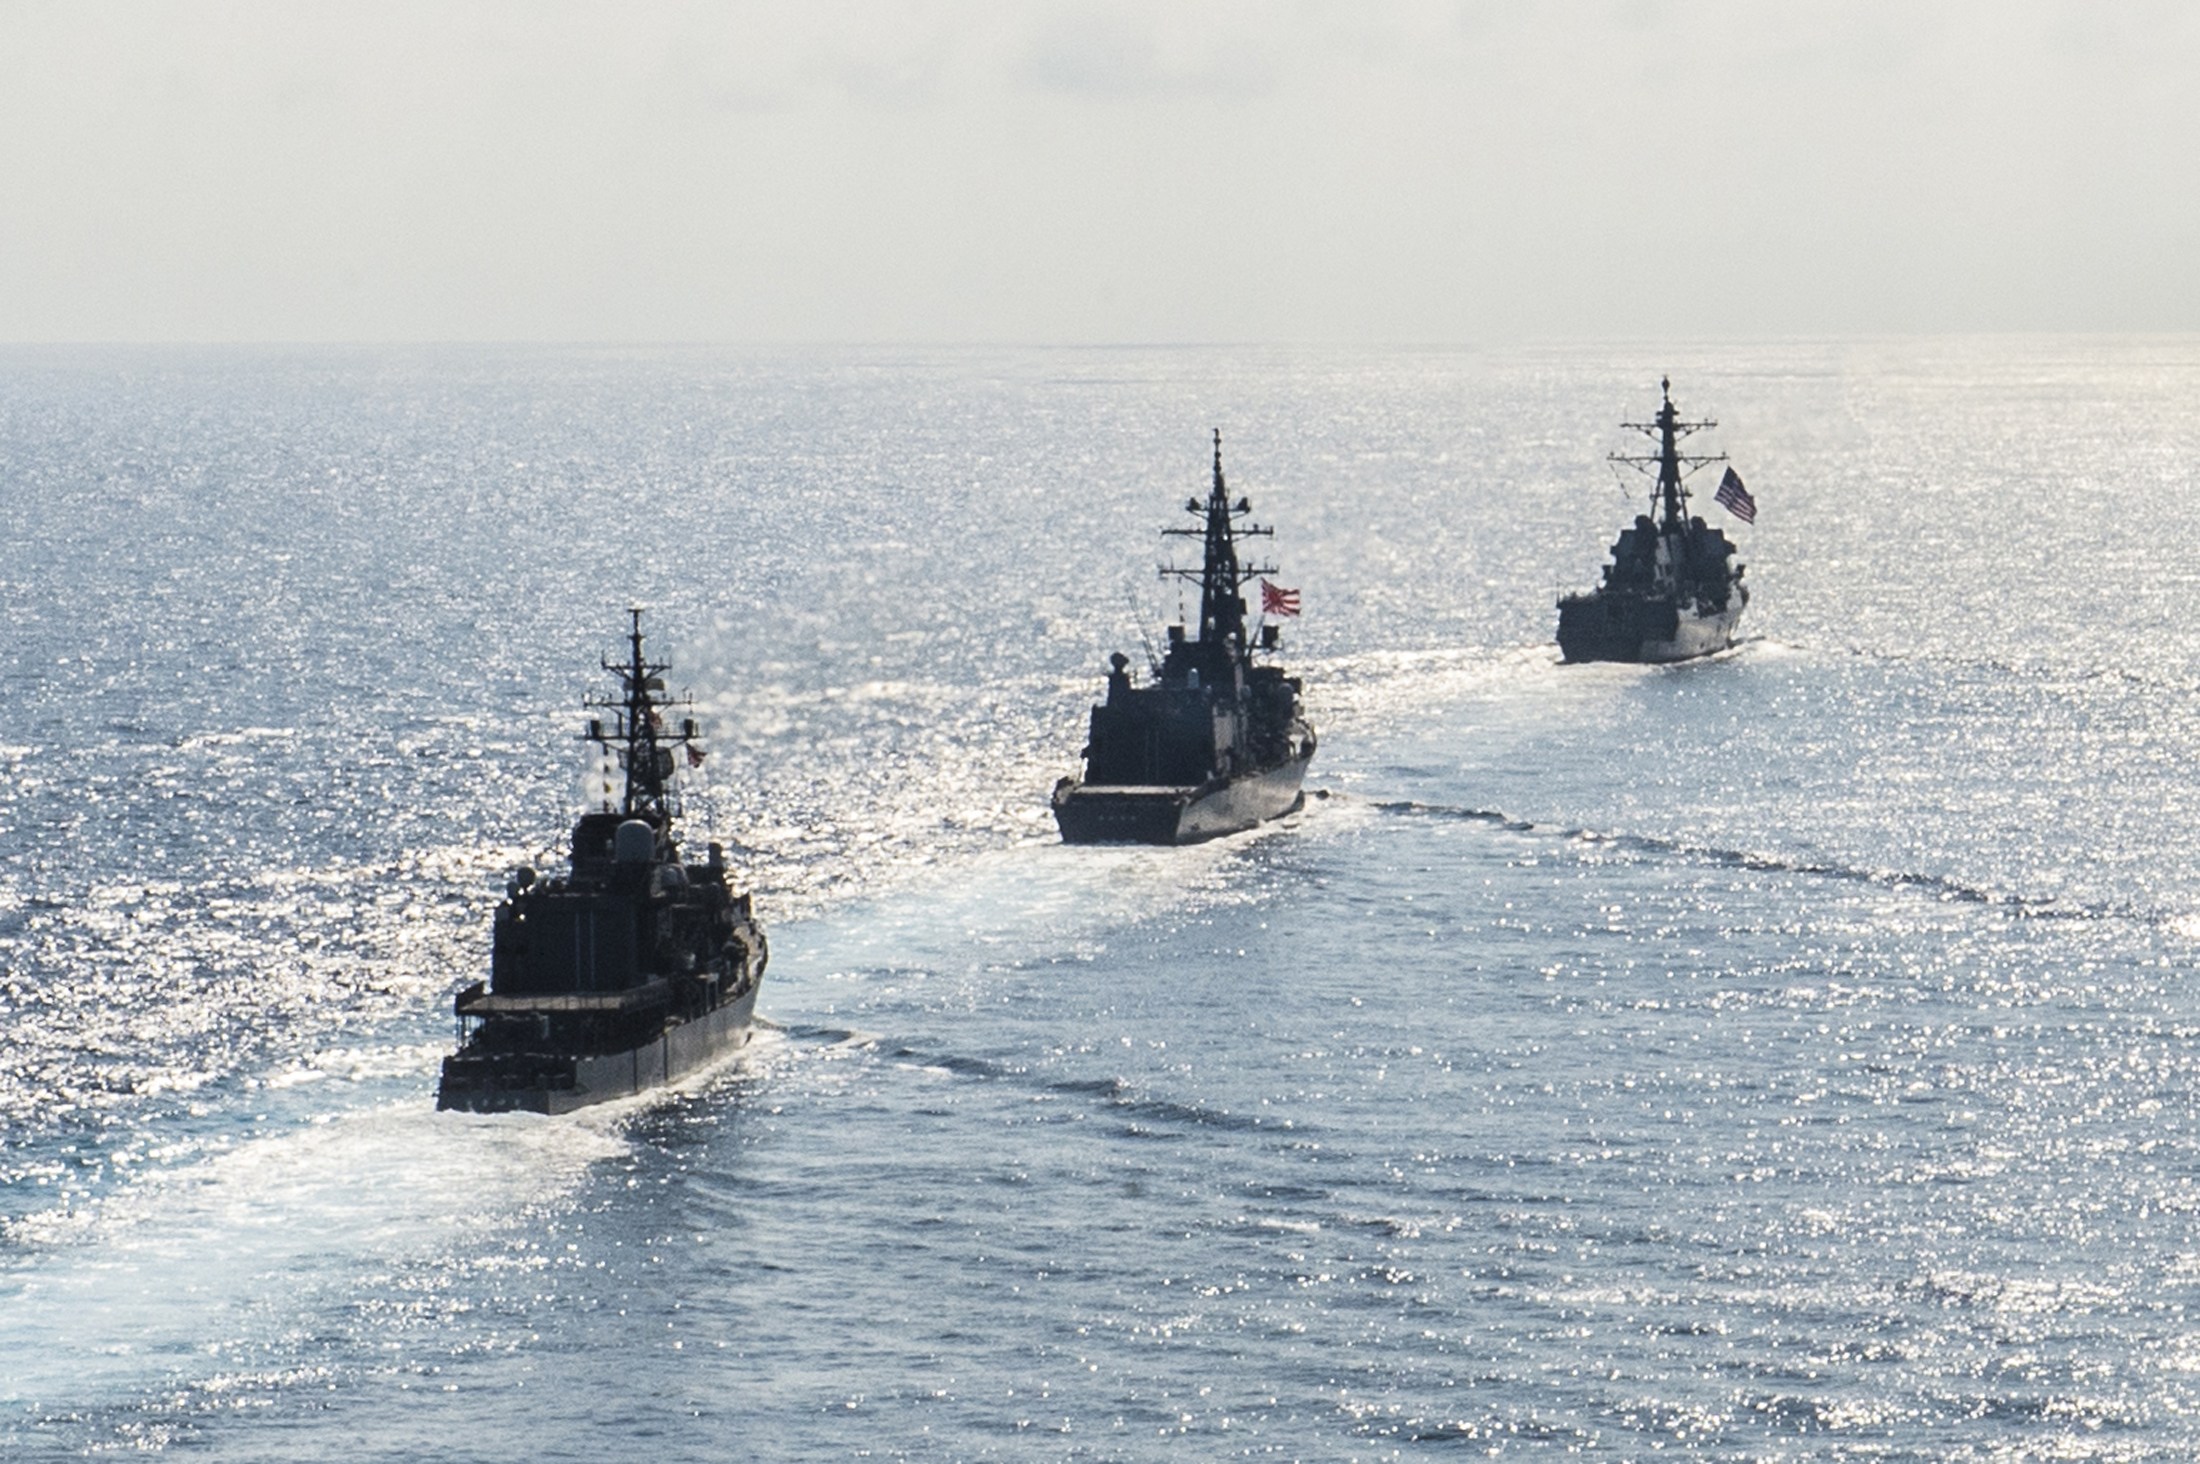 FILE PHOTO - Arleigh Burke-class guided-missile destroyer USS Mustin (DDG 89) transits in formation with Japan Maritime Self-Defense Force ships JS Kirisame (DD 104) and JS Asayuki (DD 132) during bilateral training in South China Sea on April 21, 2015. Courtesy David Flewellyn/U.S. Navy/Handout via REUTERS